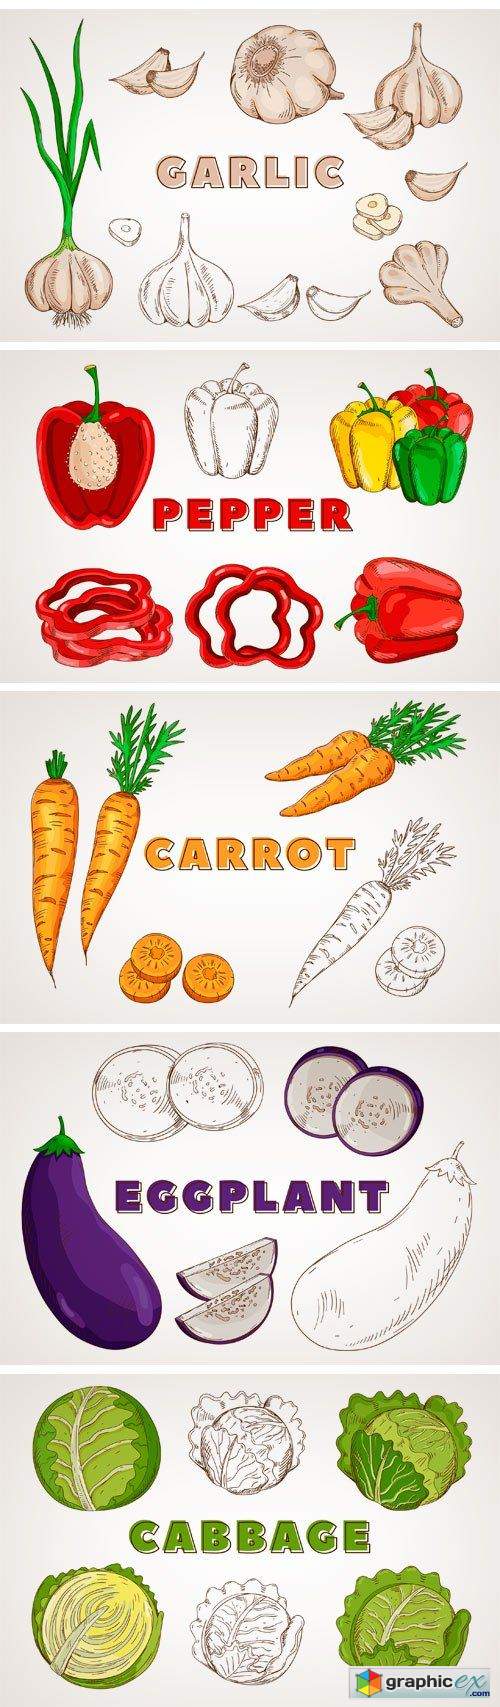 Vegetables in the Vintage Style